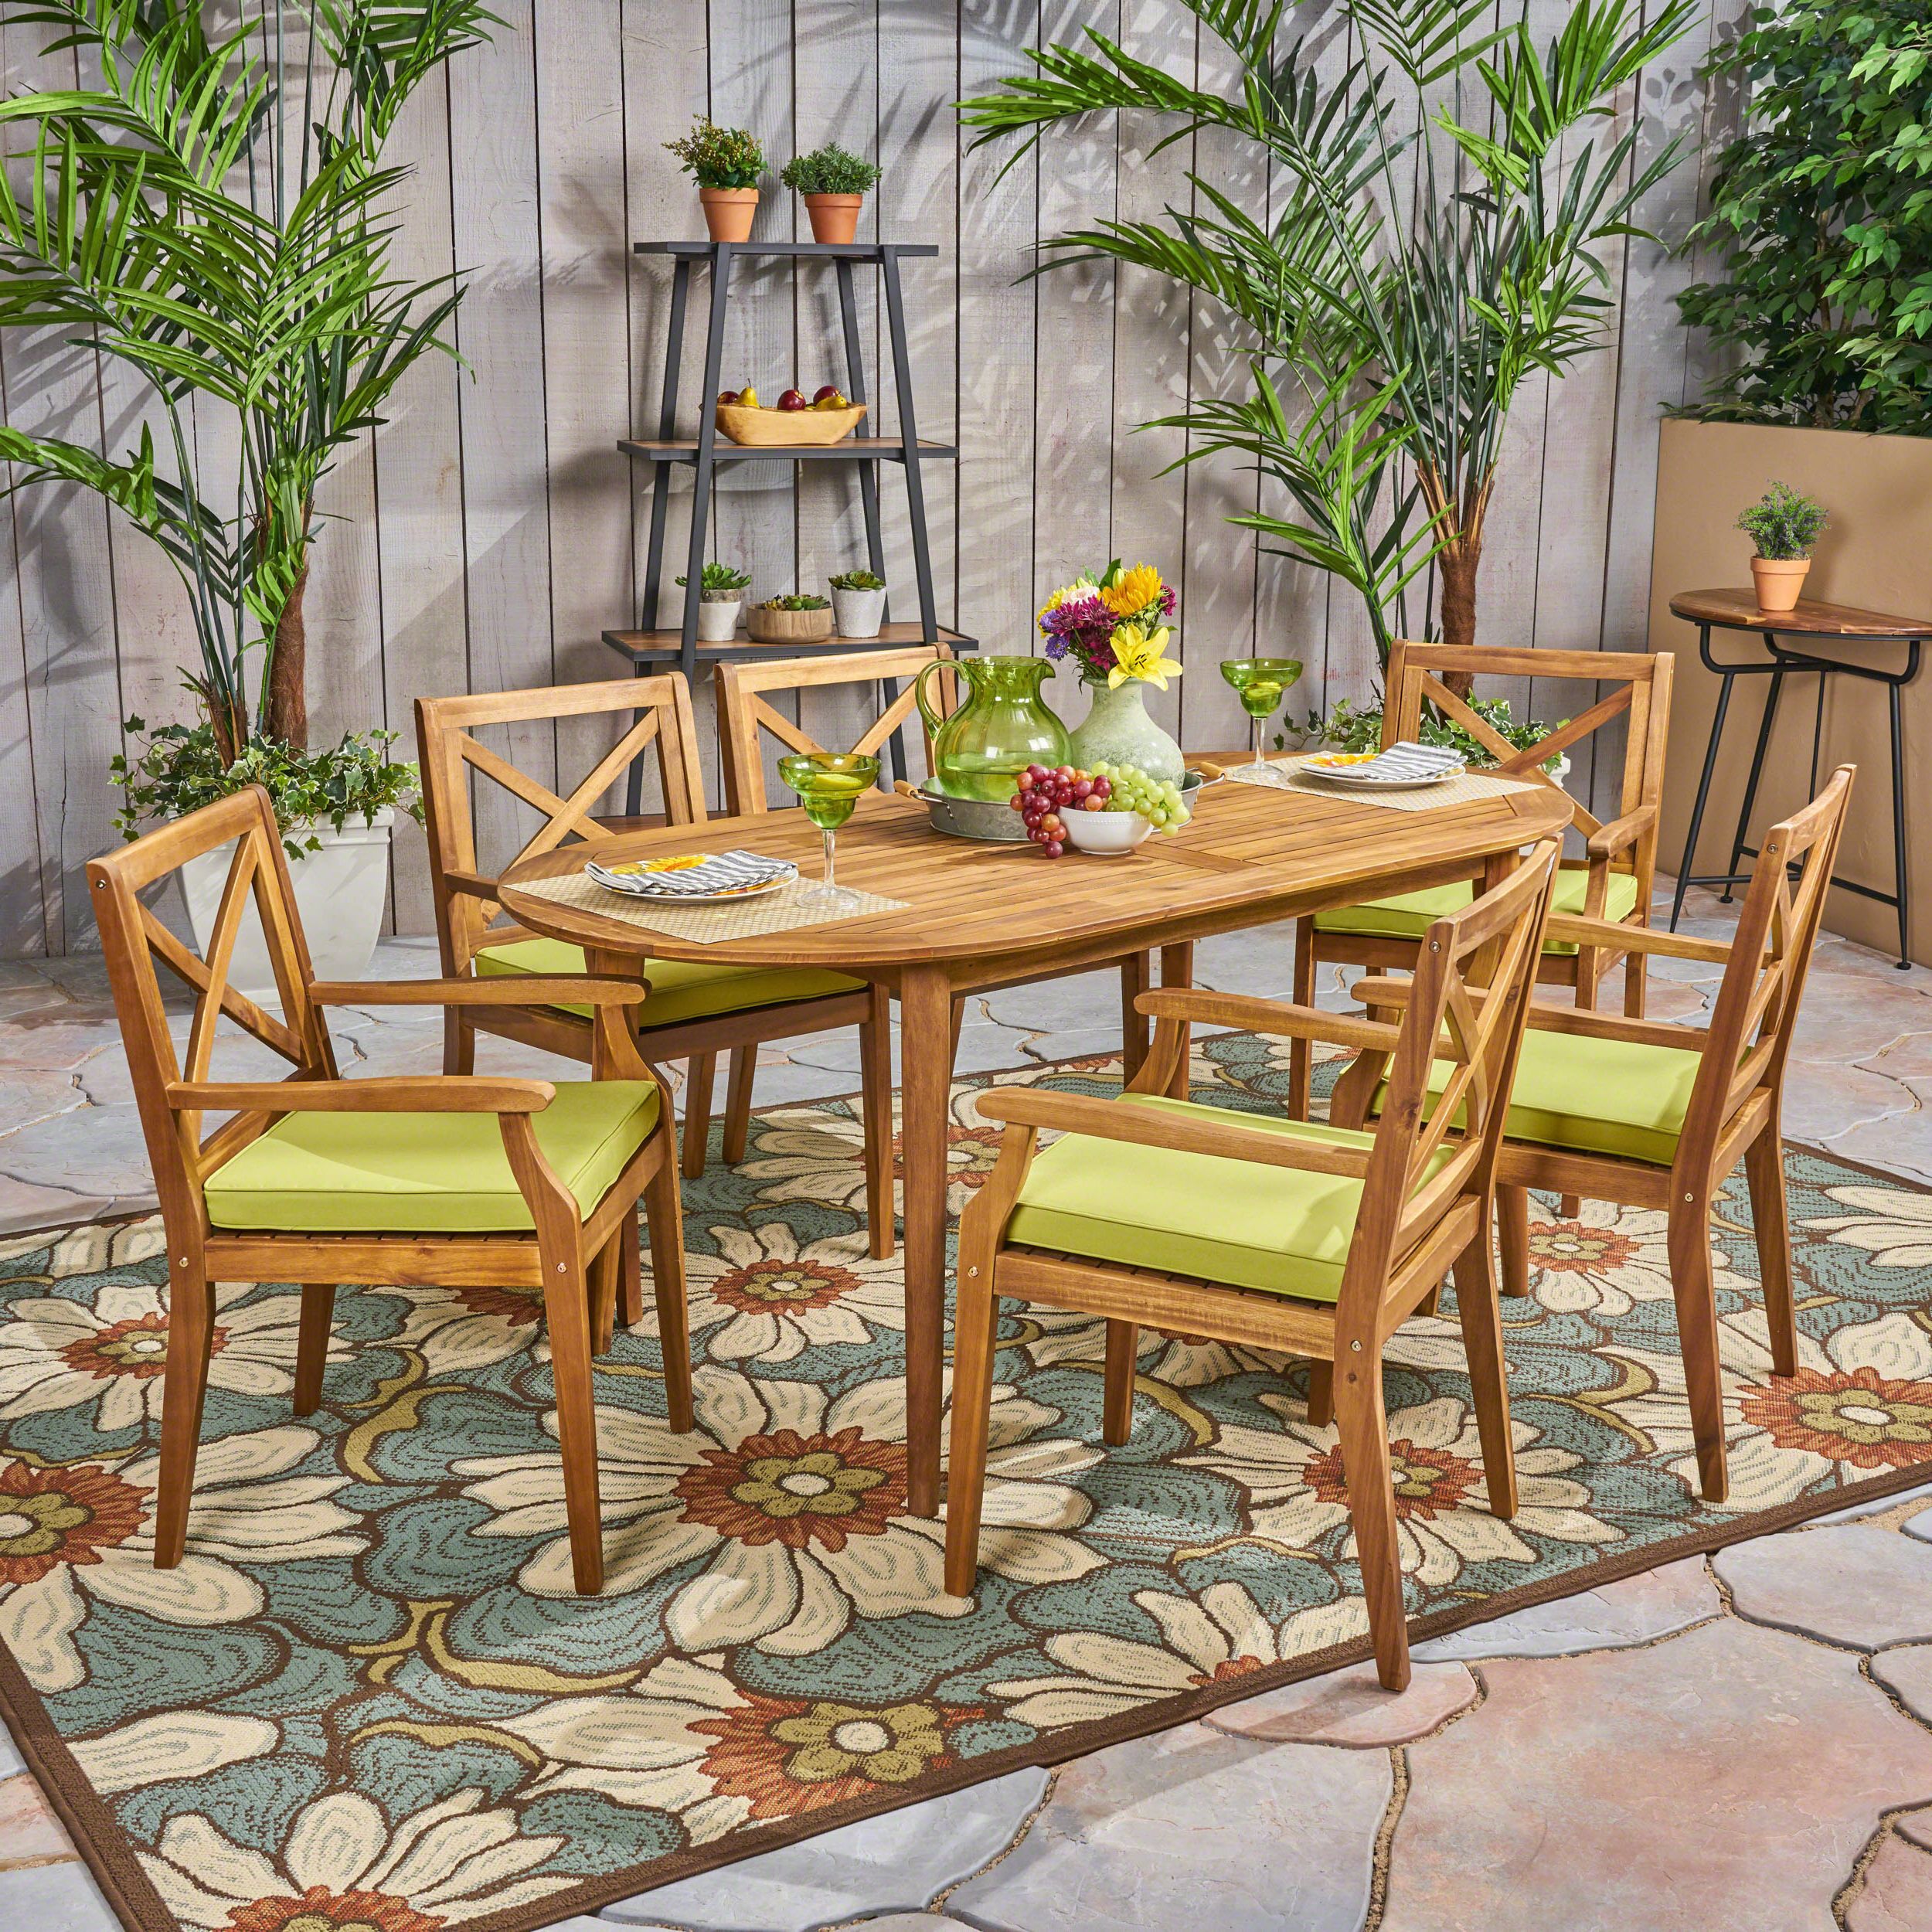 Most Popular Oakley Outdoor 7 Piece Acacia Wood Dining Set With Cushions, Teak Throughout Acacia Wood Outdoor Seating Patio Sets (View 2 of 15)